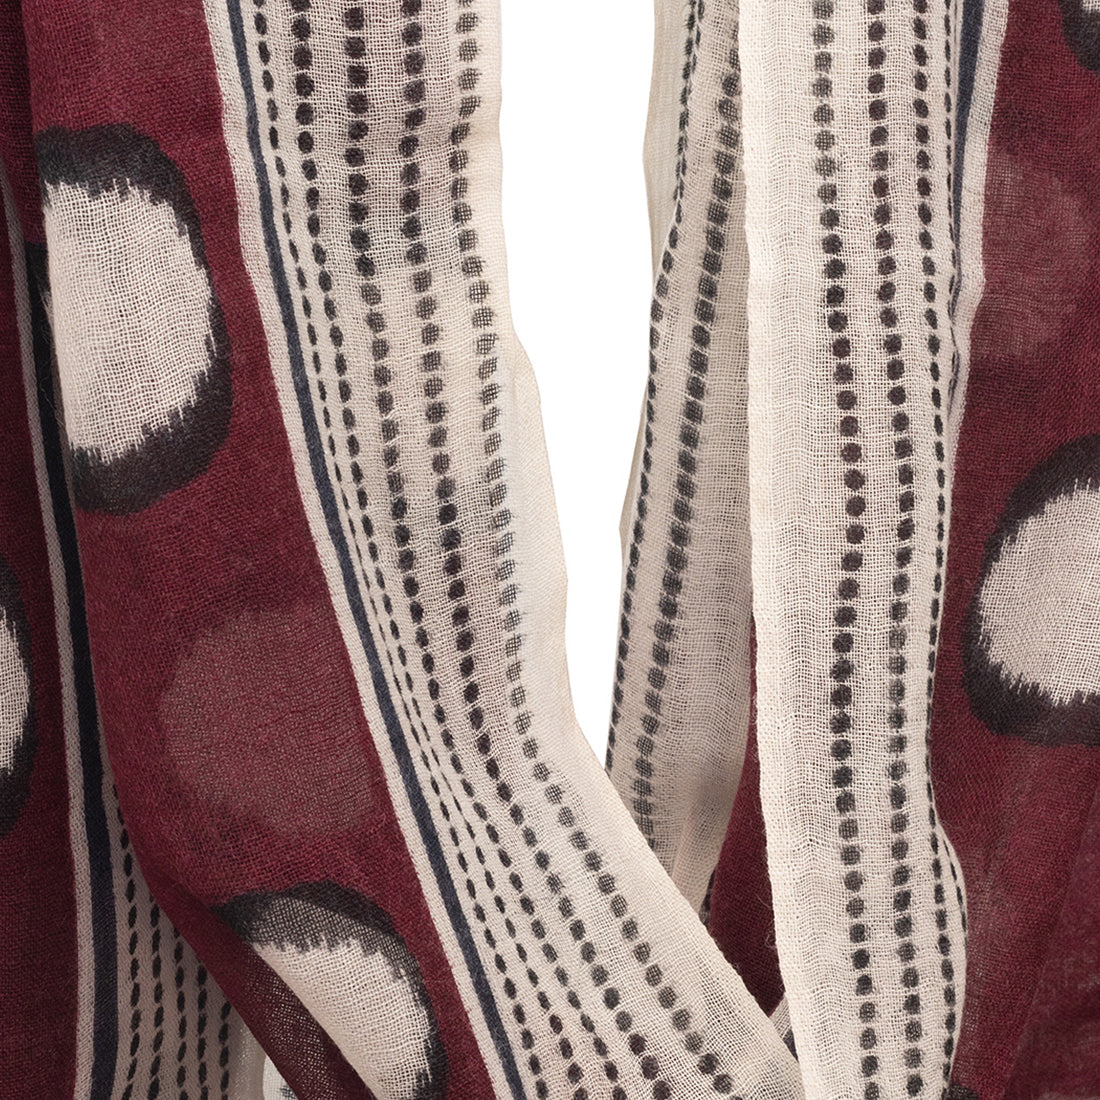 Dark Red Woolen Scarf With Black & White Polka Dots And Stripes